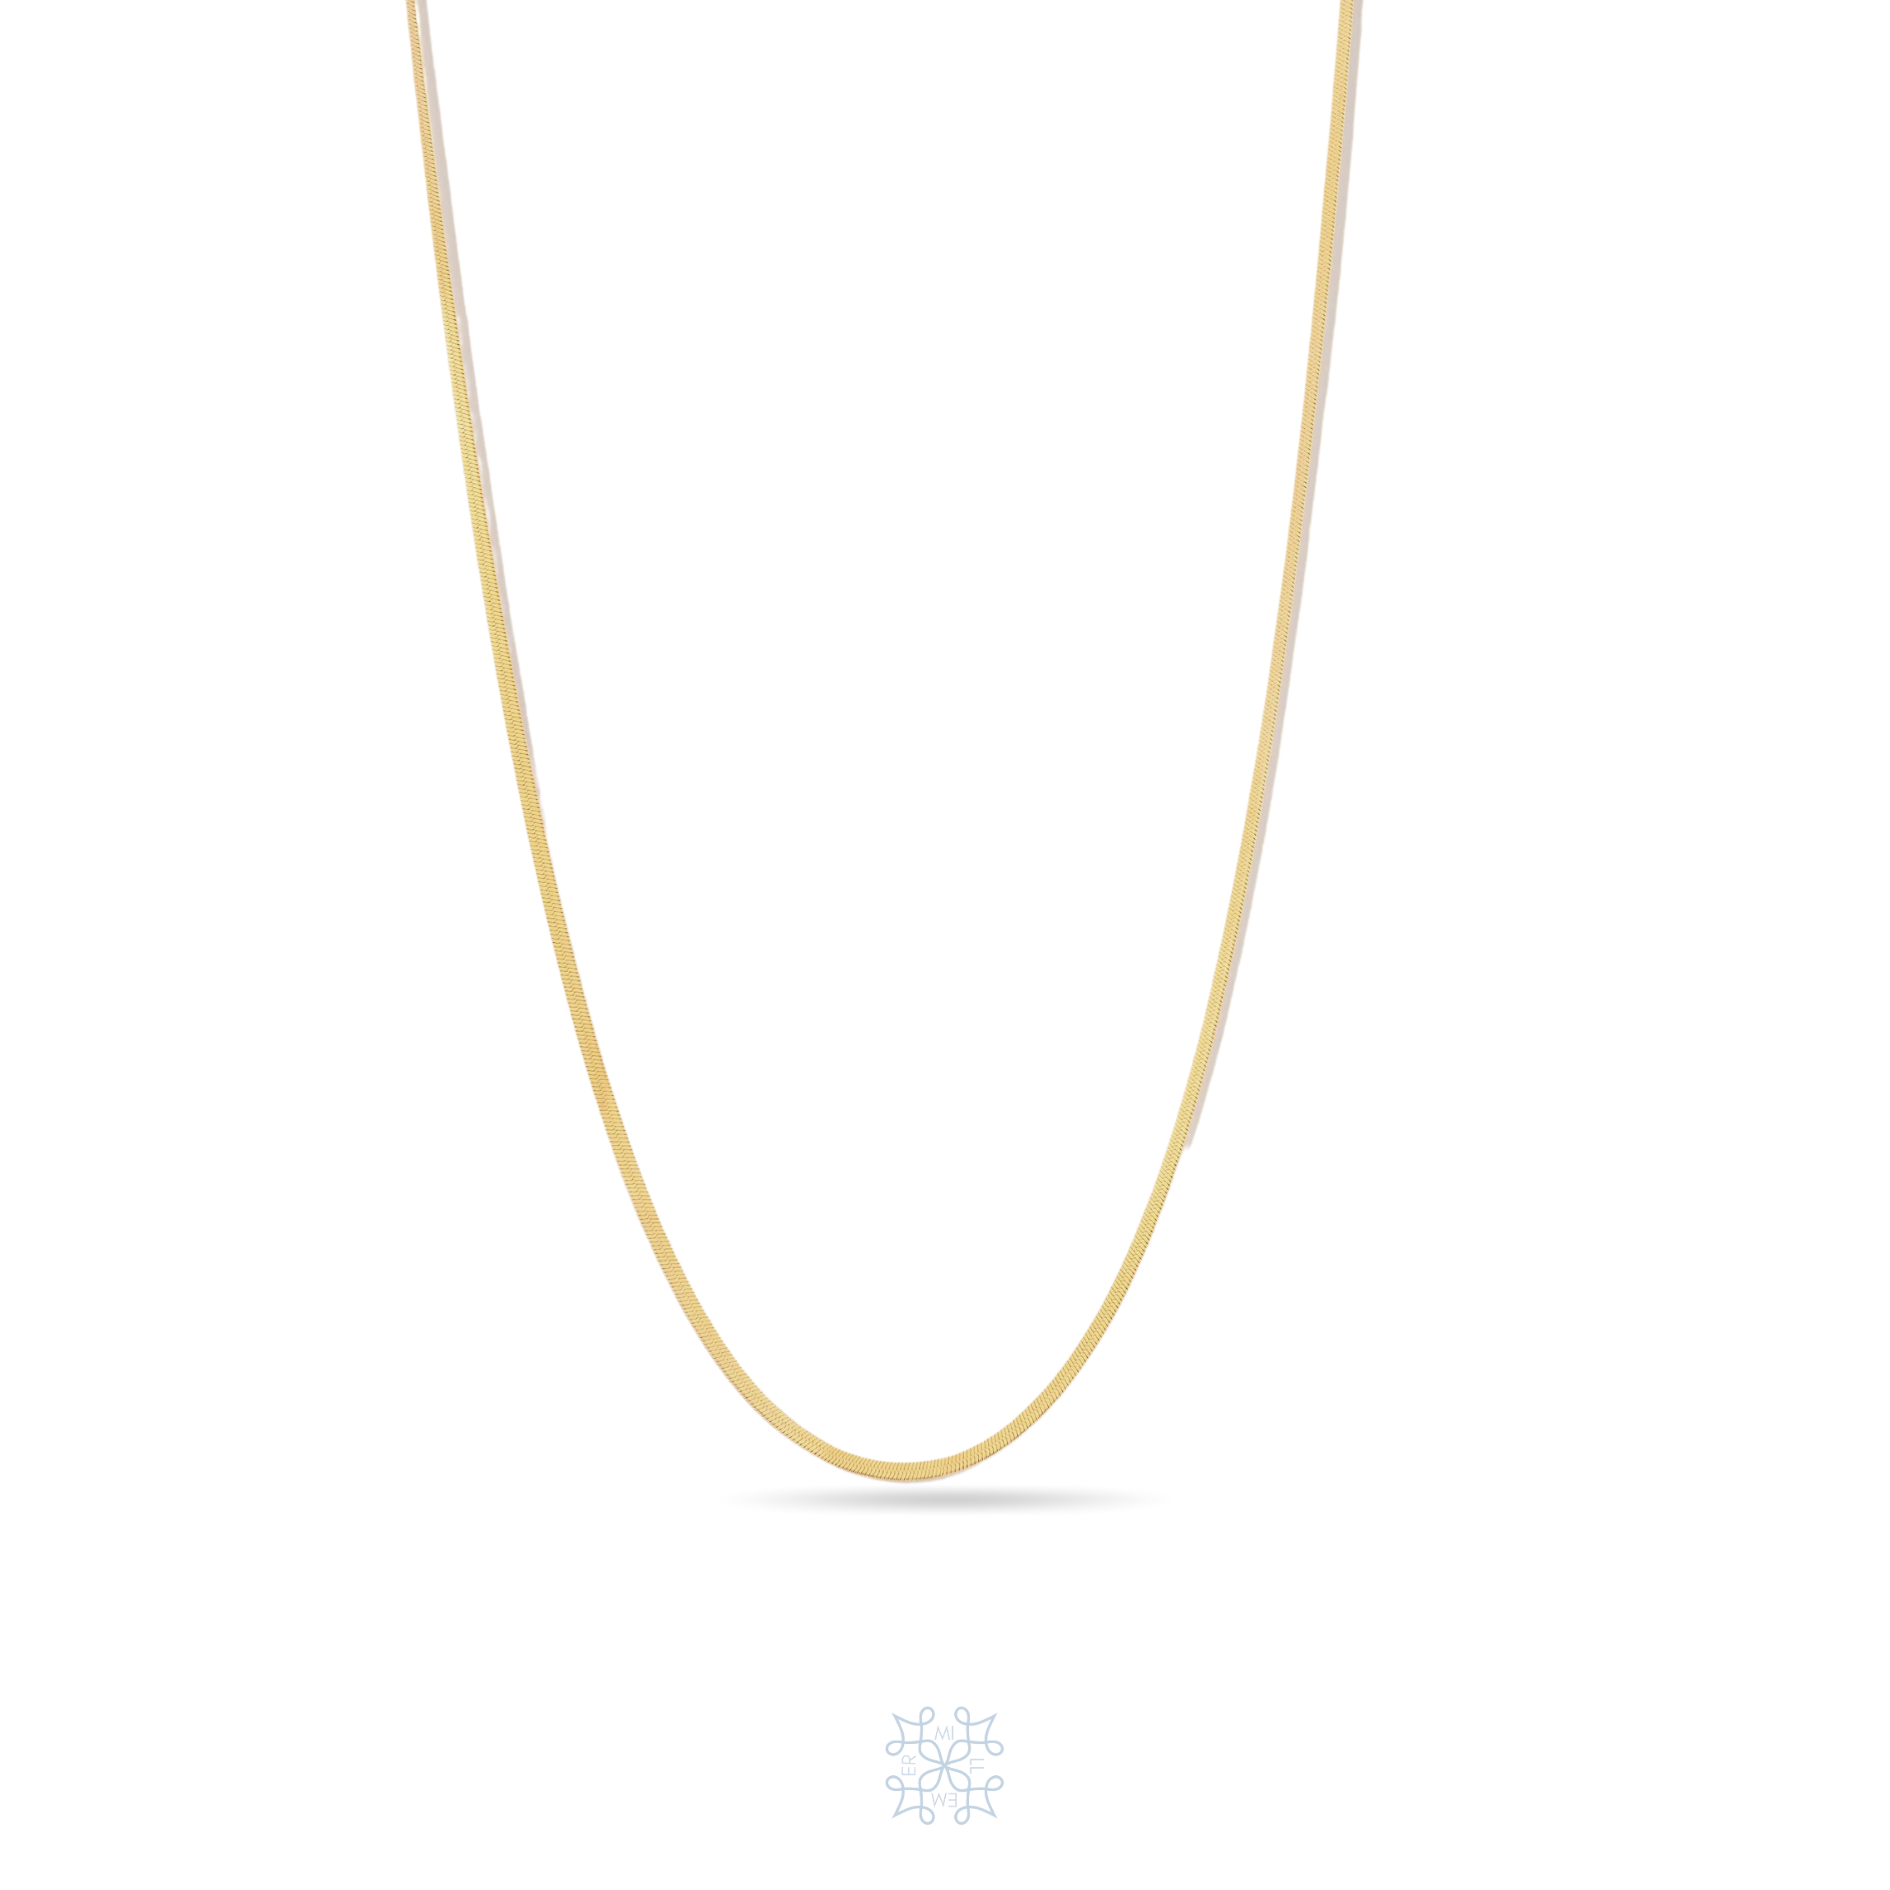 Herringbone necklace texture, two milimetres slim, gold, chain necklace. 